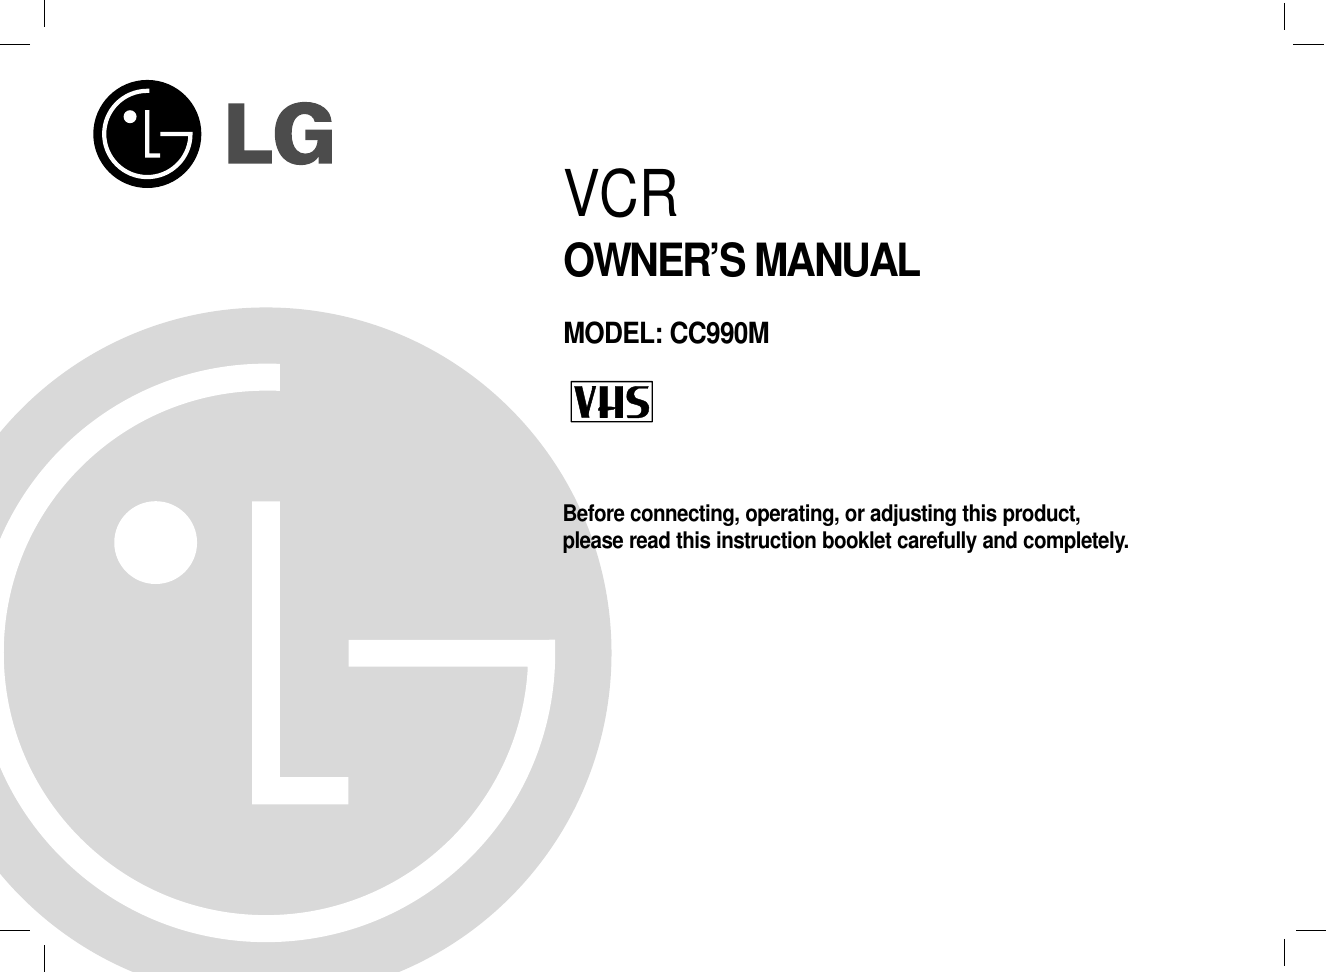 Before connecting, operating, or adjusting this product, please read this instruction booklet carefully and completely.VCROWNER’S MANUALMODEL: CC990M